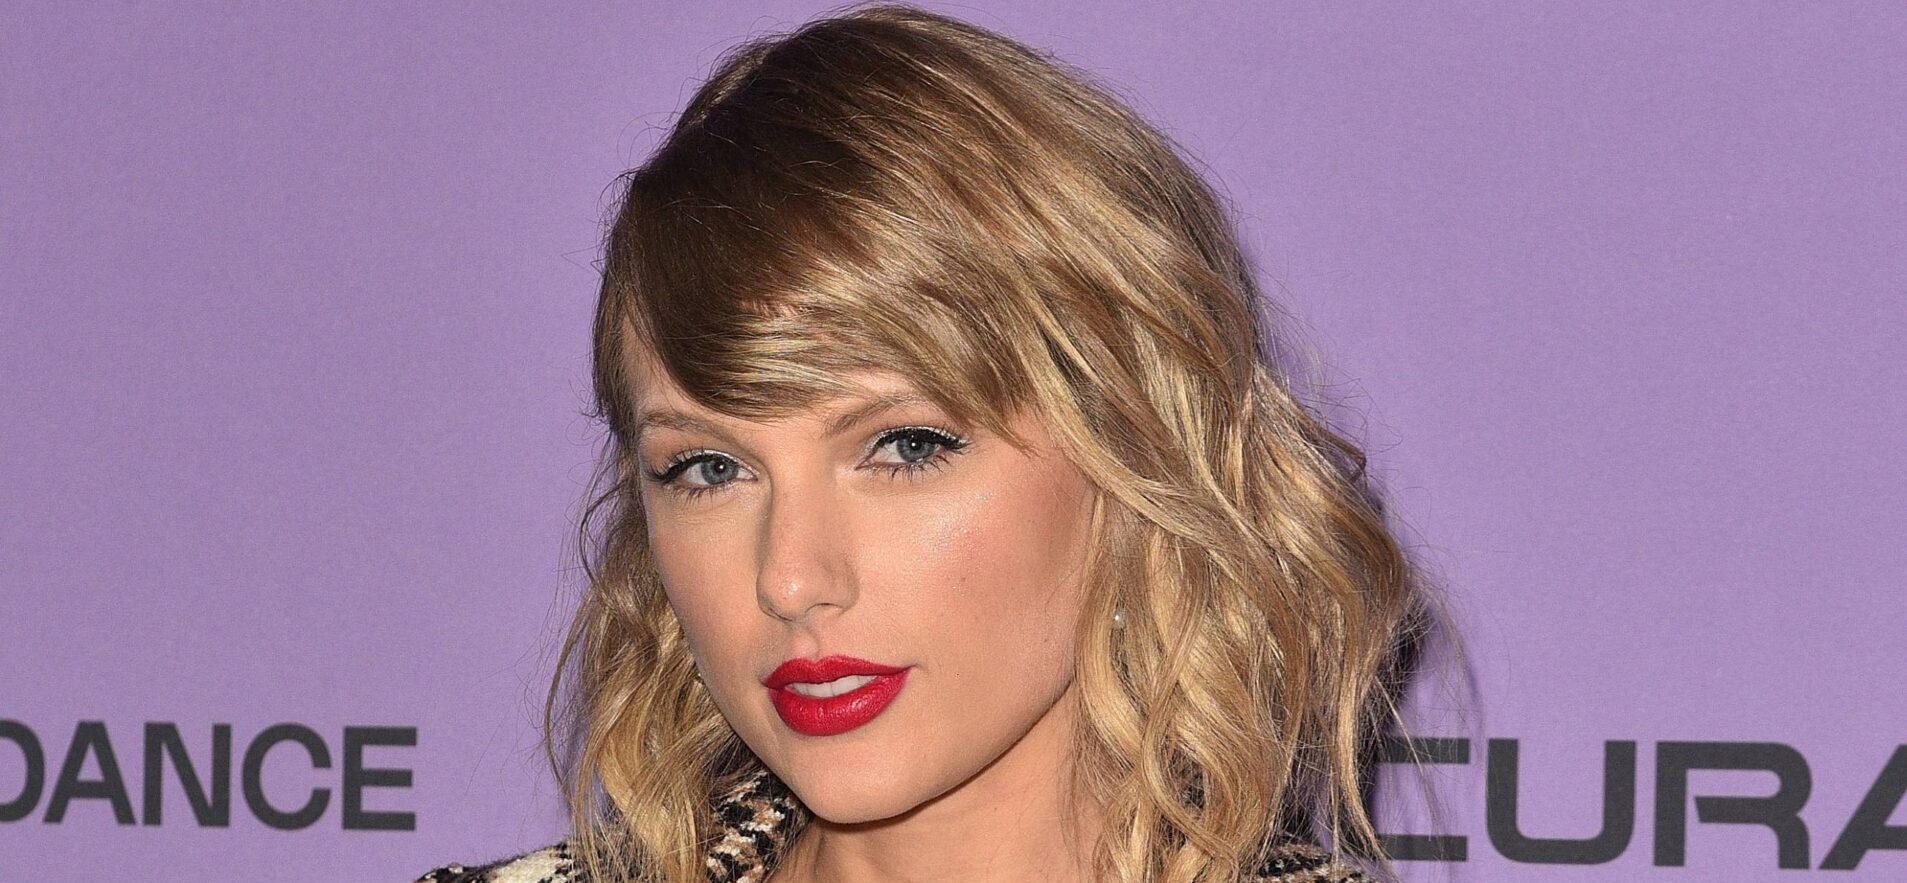 Taylor Swift’s Stalker Being Admitted To Mental Health Facility, Unfit To Stand Trial